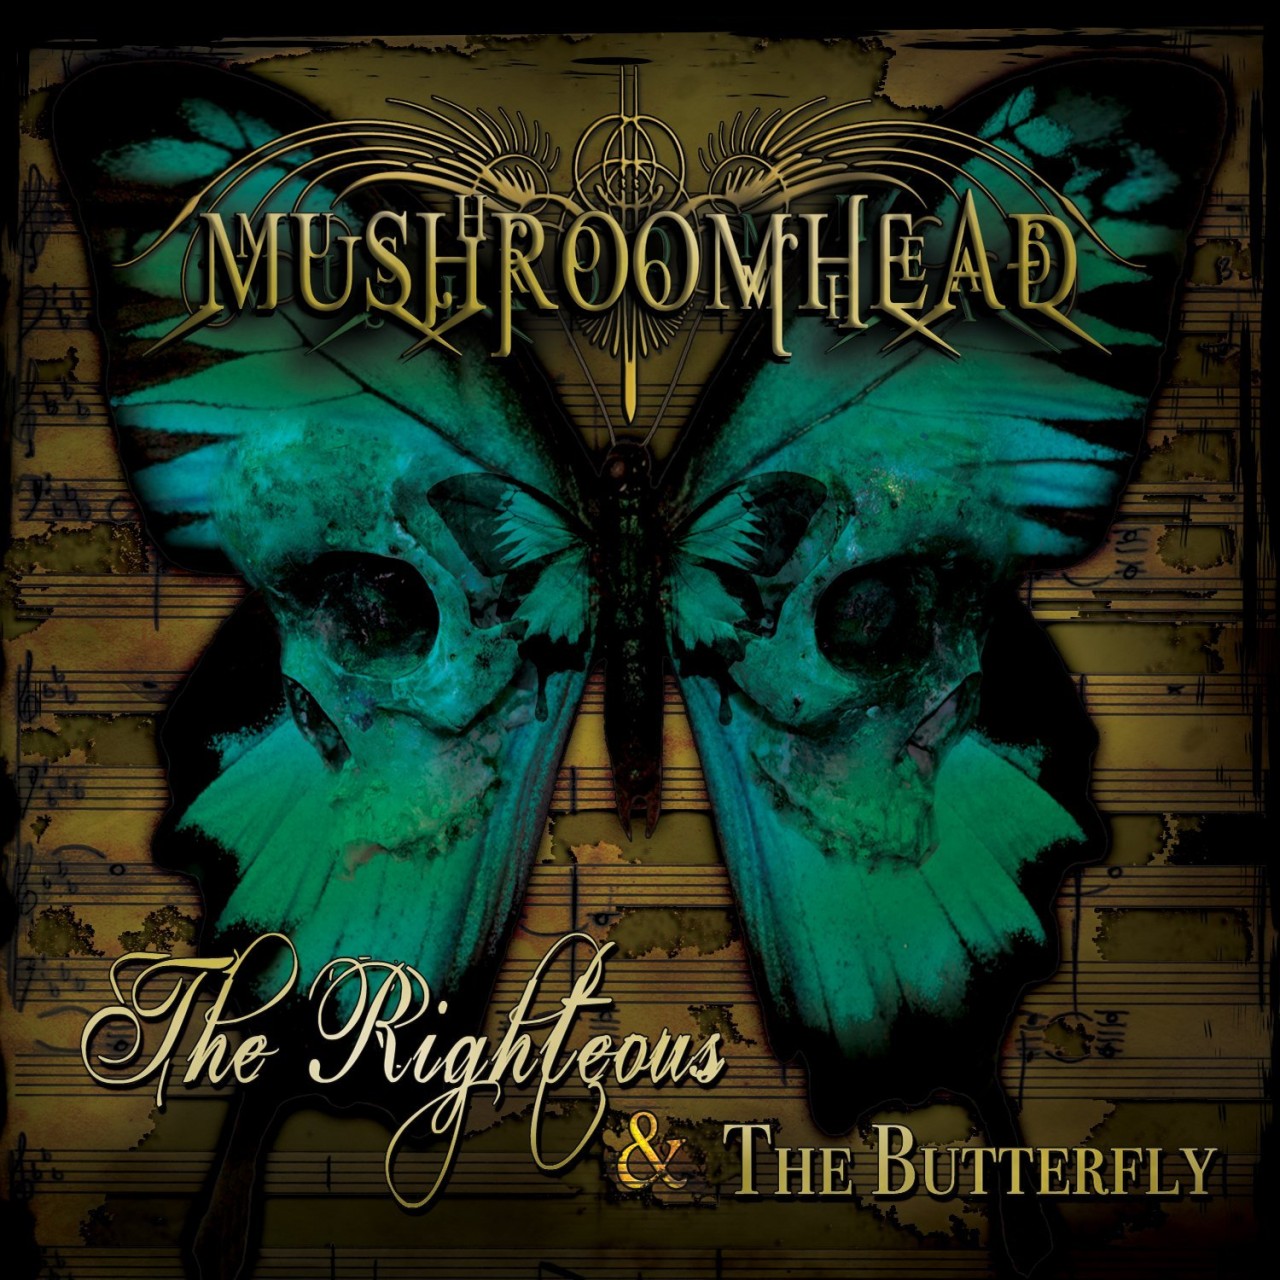 Mushroomhead - The Righteous & The Butterfly